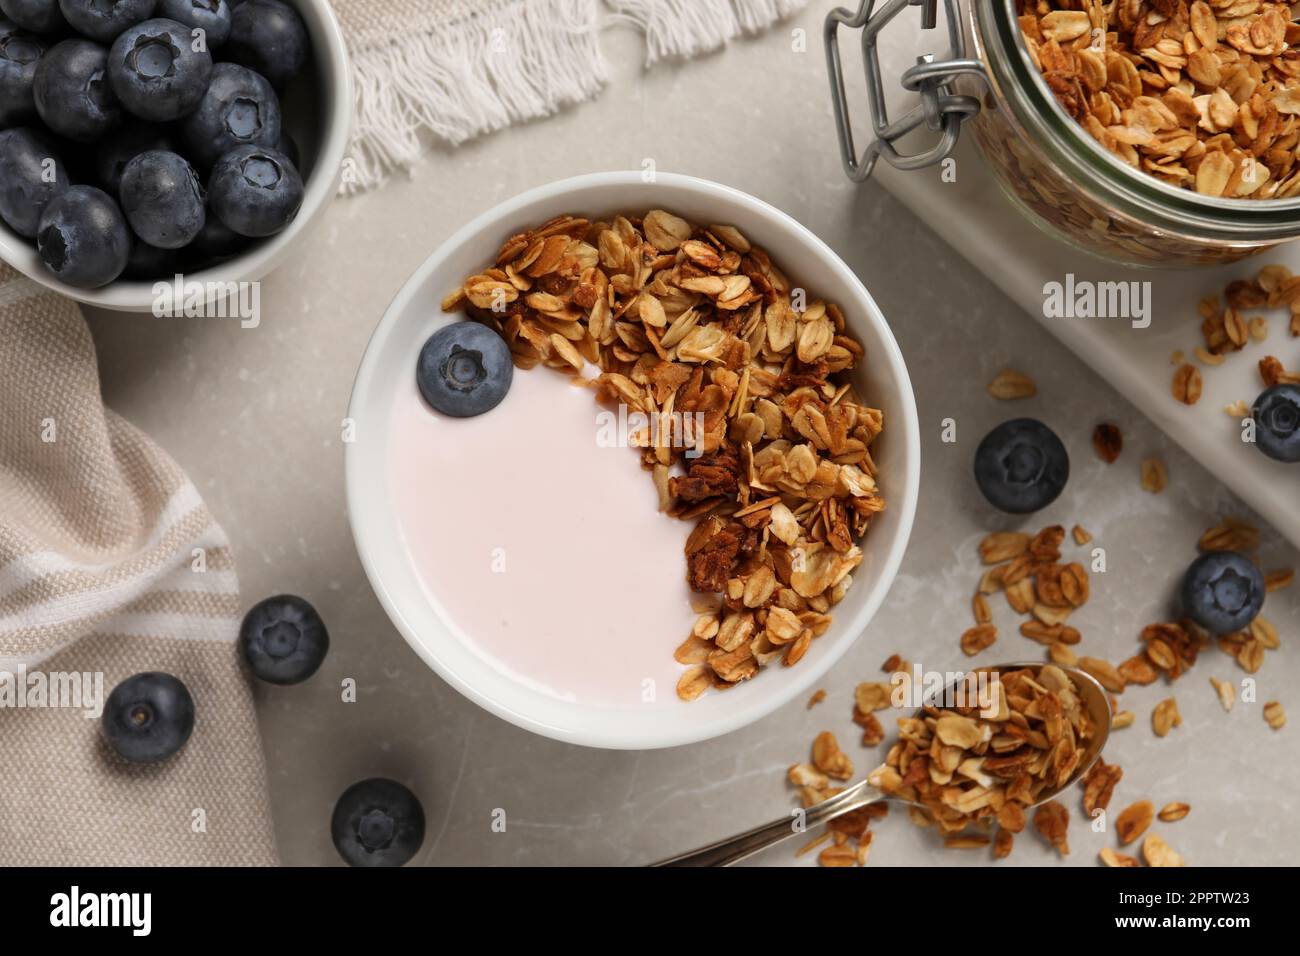 Delicious yogurt with granola and blueberries served on grey marble table, flat lay Stock Photo